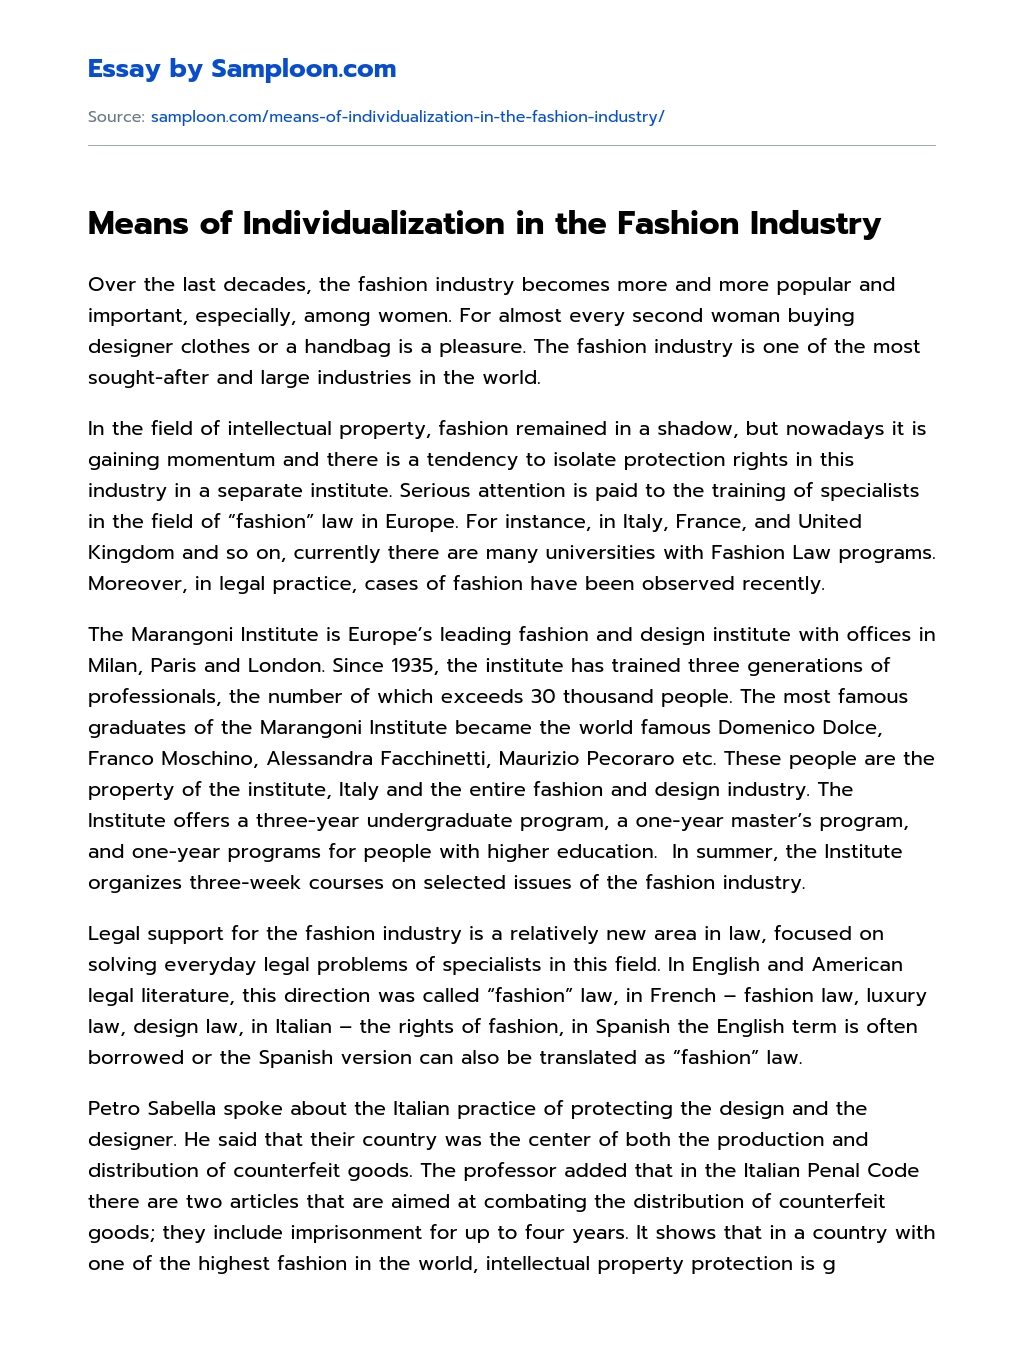 Means of Individualization in the Fashion Industry essay